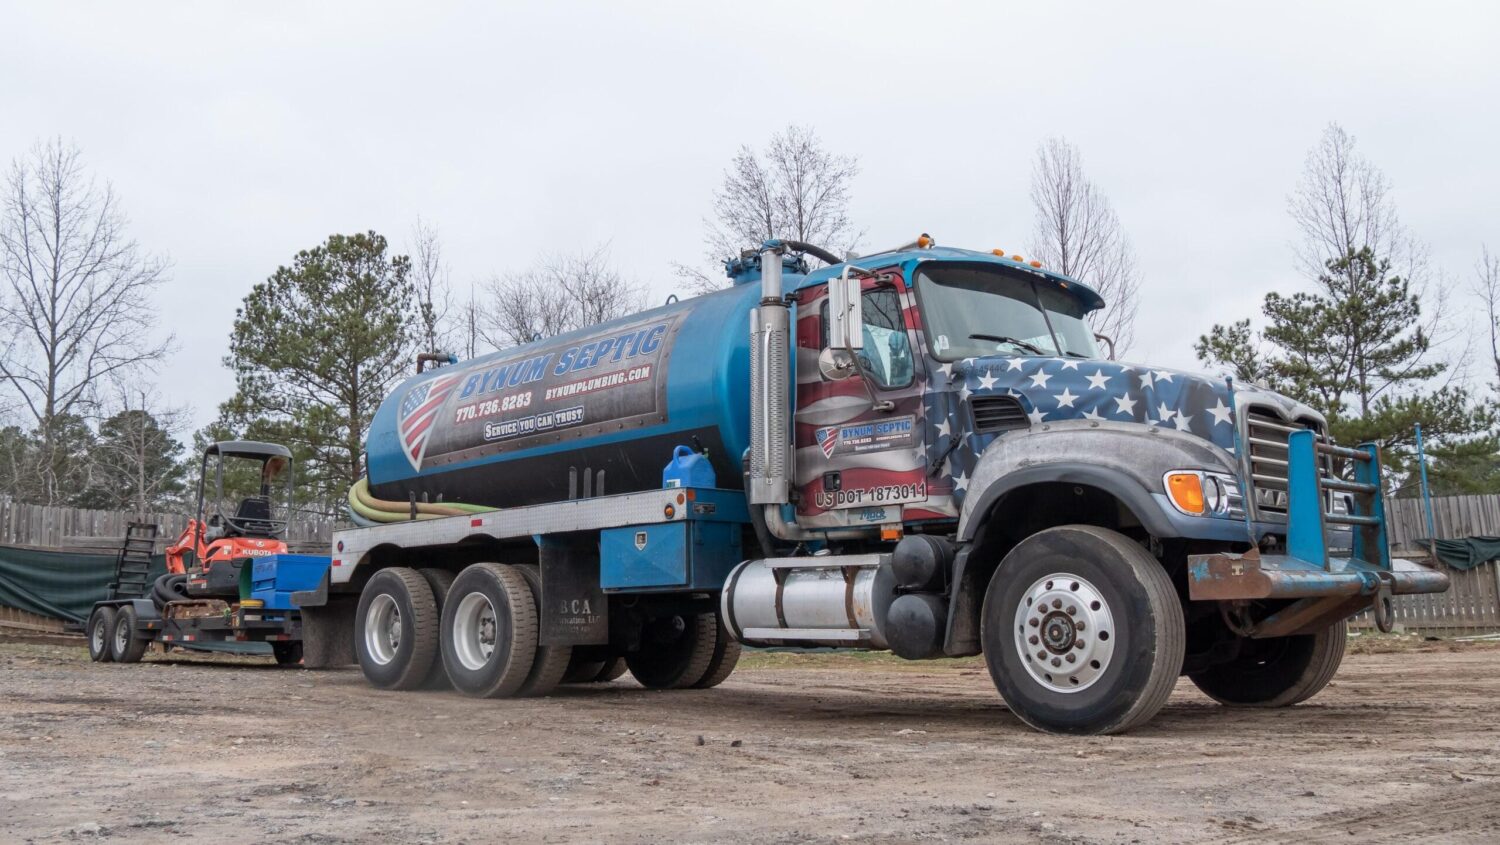 Bynum Septic service truck - commercial septic tank maintenance